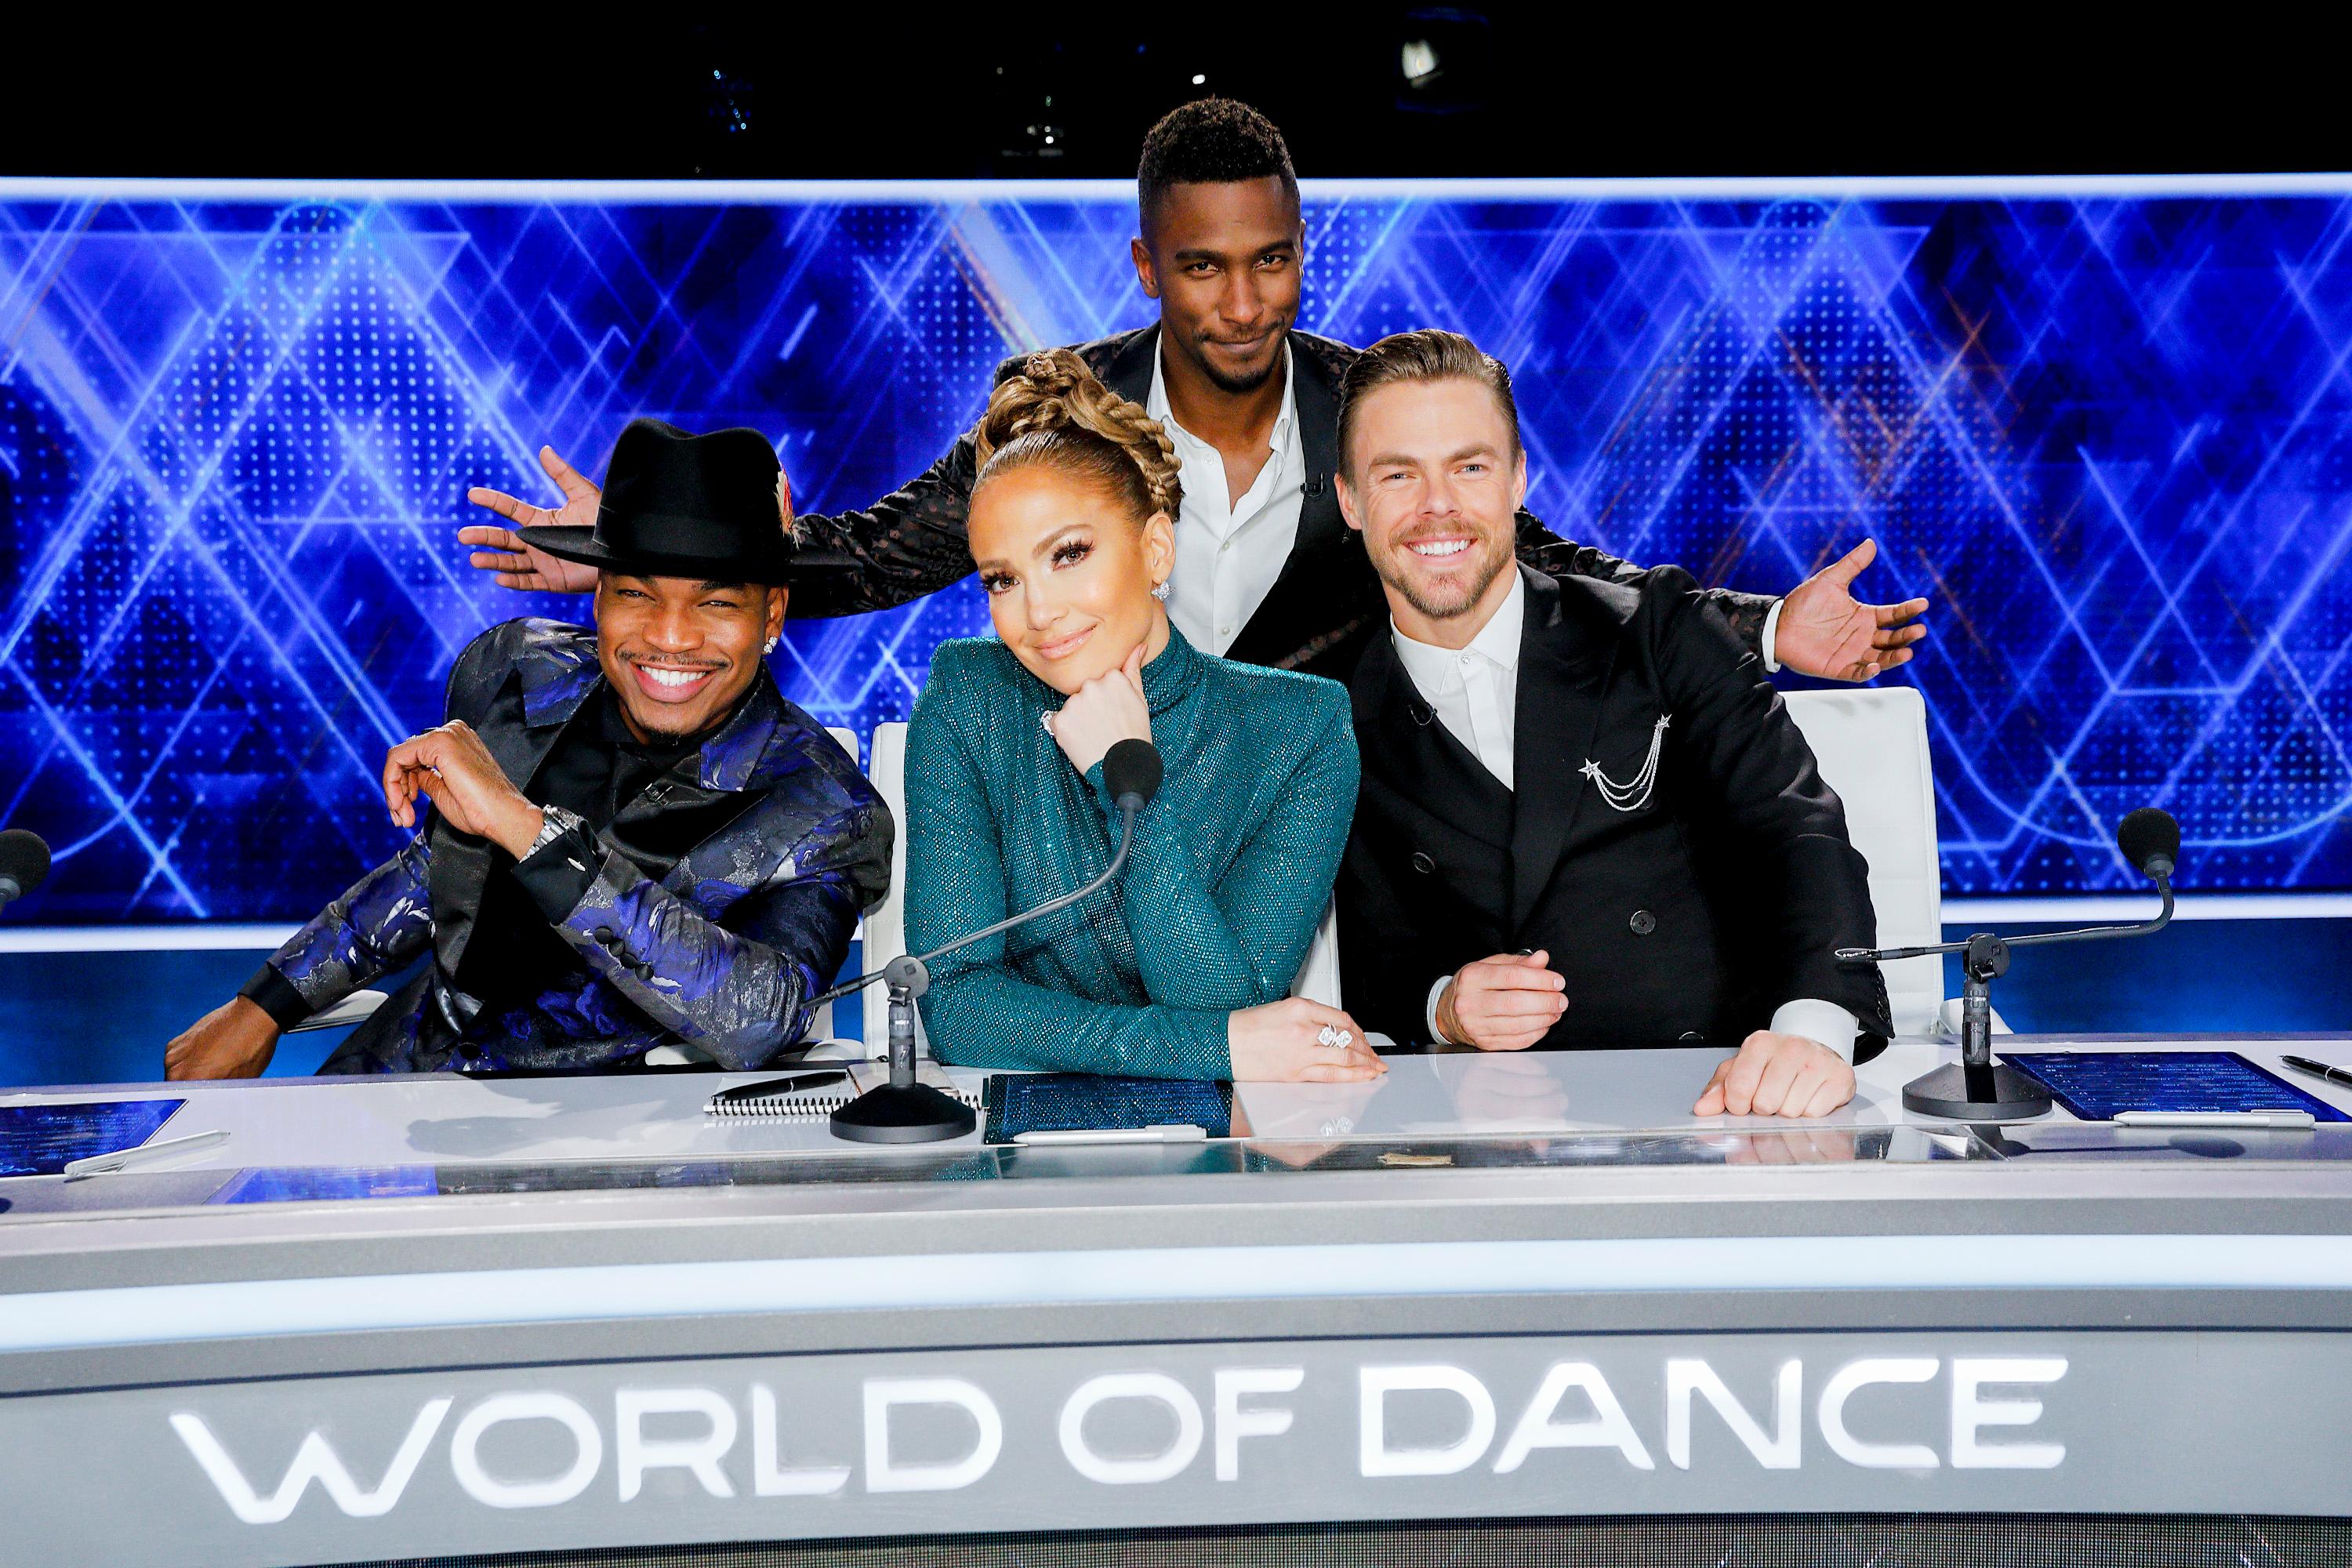 Filming for the Next Season of “World of Dance” is Underway